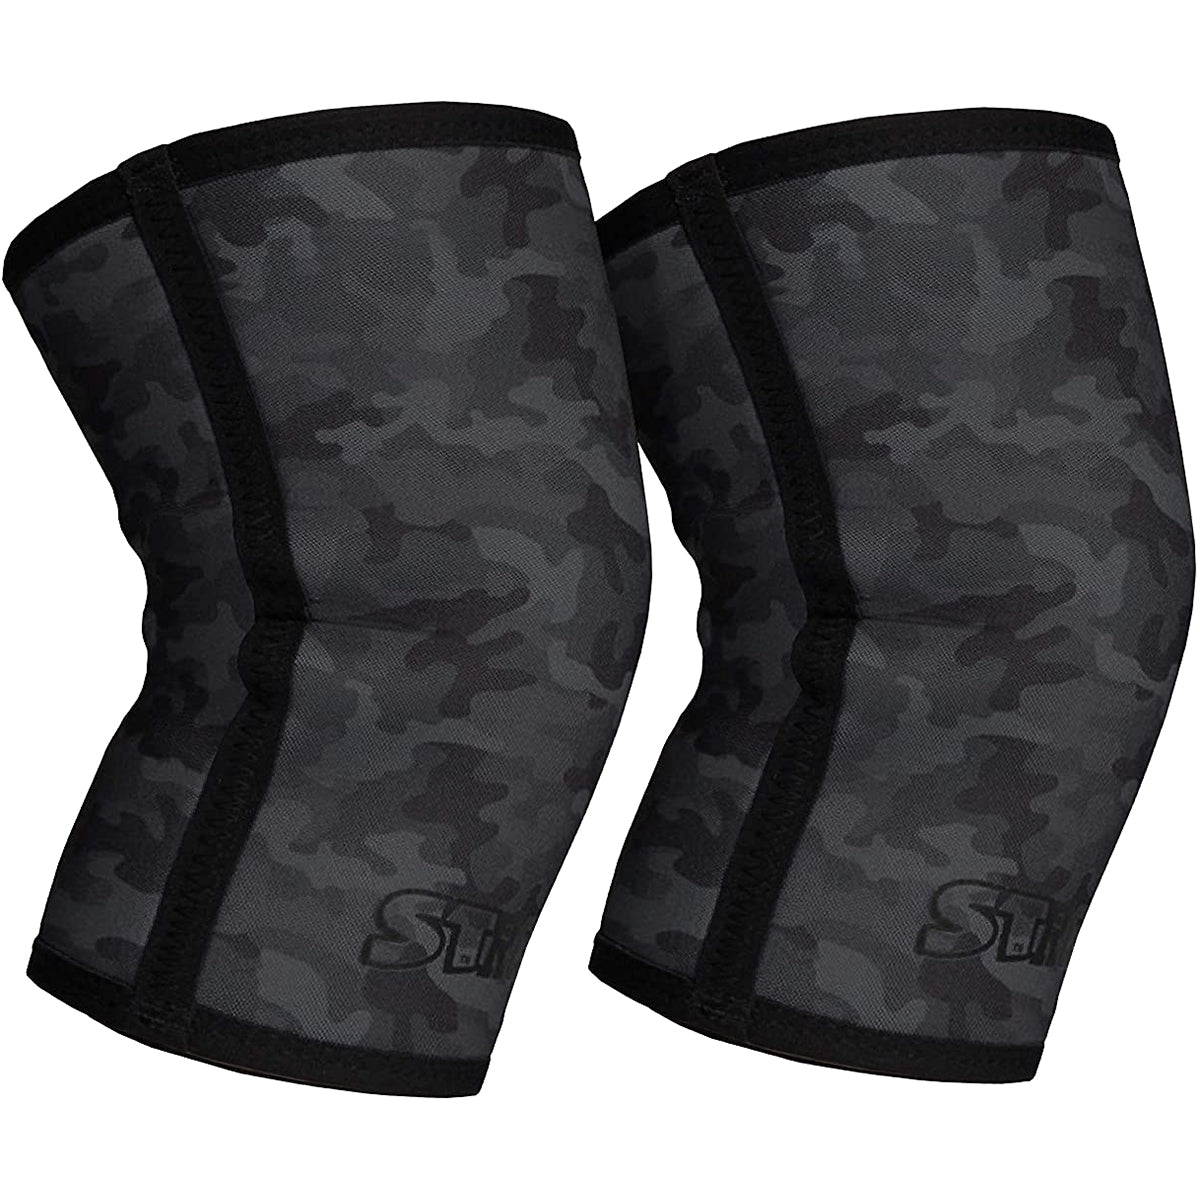 Sling Shot STrong Knee Sleeves by Mark Bell - 7mm thick neoprene supports Sling Shot